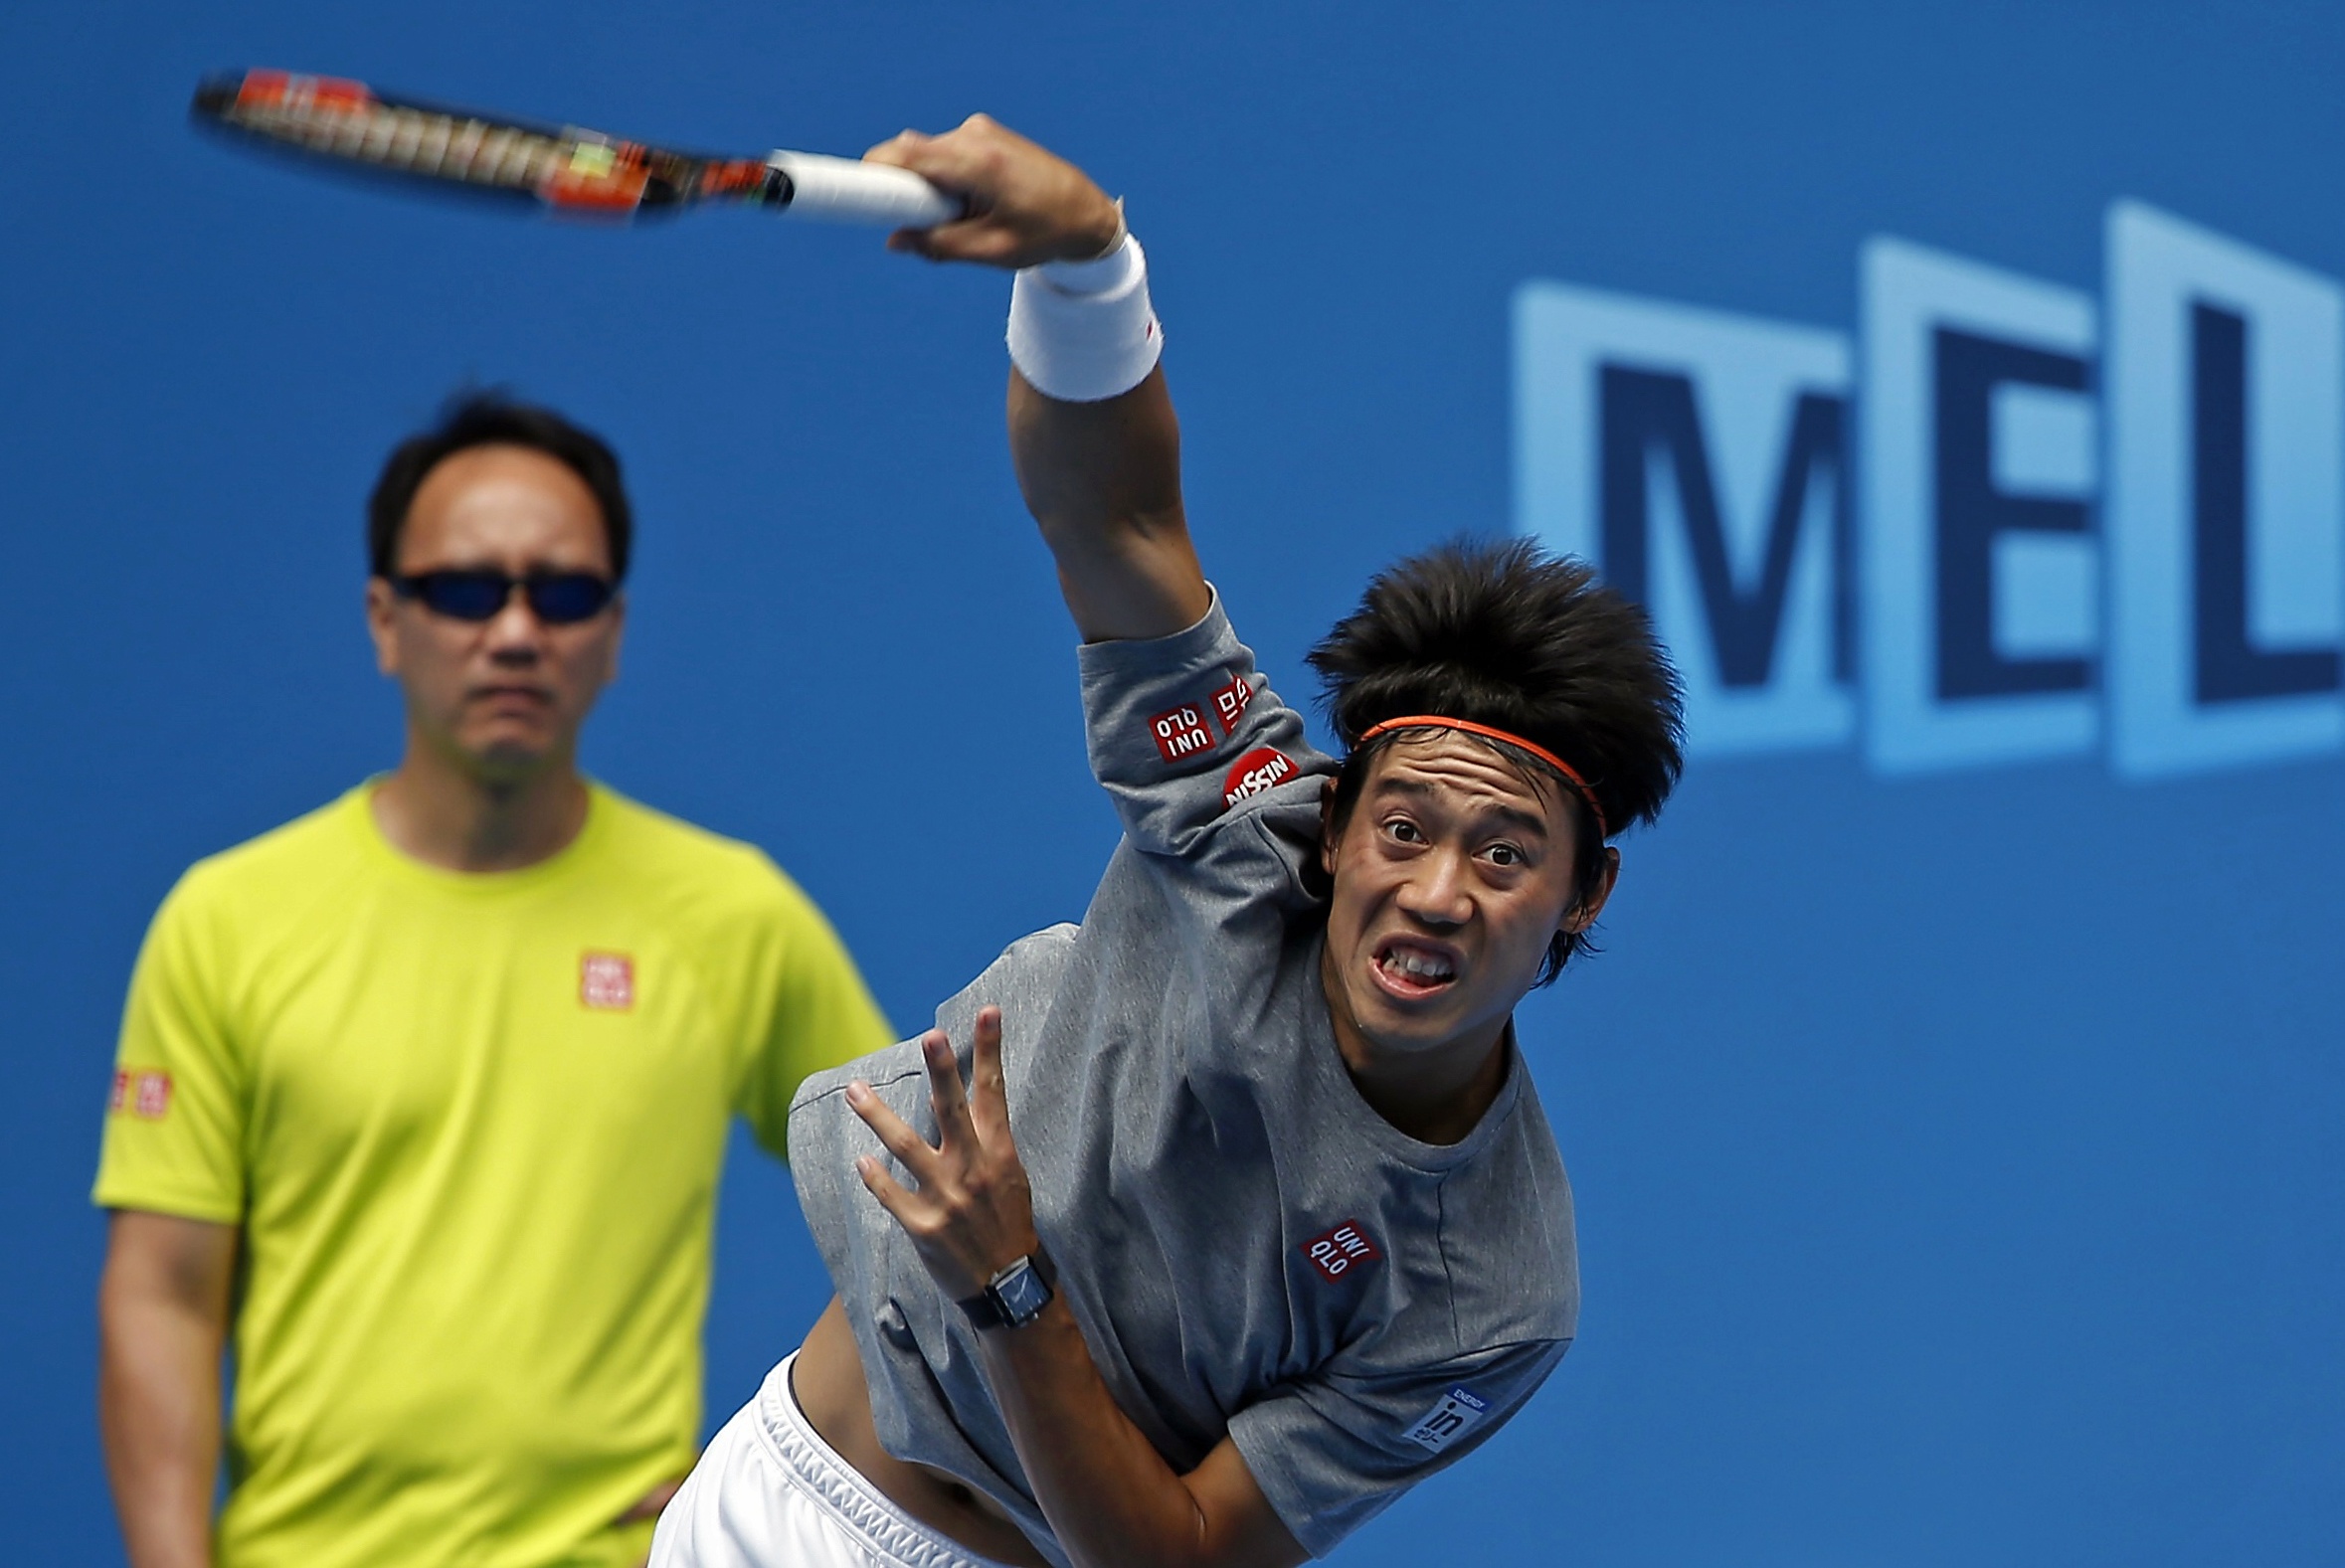 Japan's Kei Nishikori (R) hits a shot as his coach Michael Chang looks on during a training session at Hisense Arena at Melbourne Park January 18, 2015. The Australian Open tennis tournament begins on January 19. REUTERS/Issei Kato (AUSTRALIA - Tags: SPORT TENNIS)